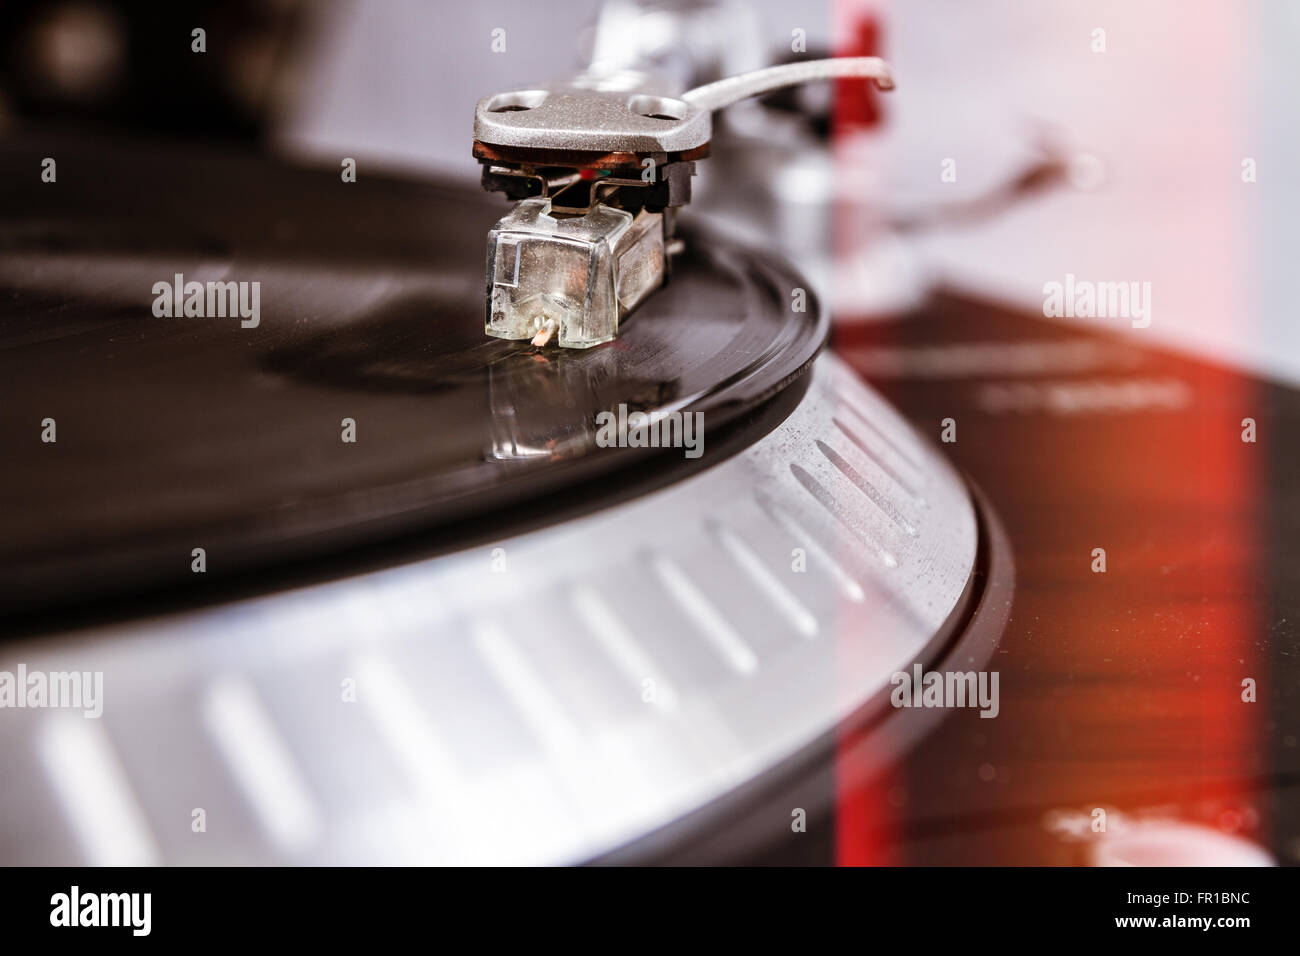 Professional turntable playing vinyl records with music. Close up on details : needle, tonearm, platter, vinyl record Stock Photo